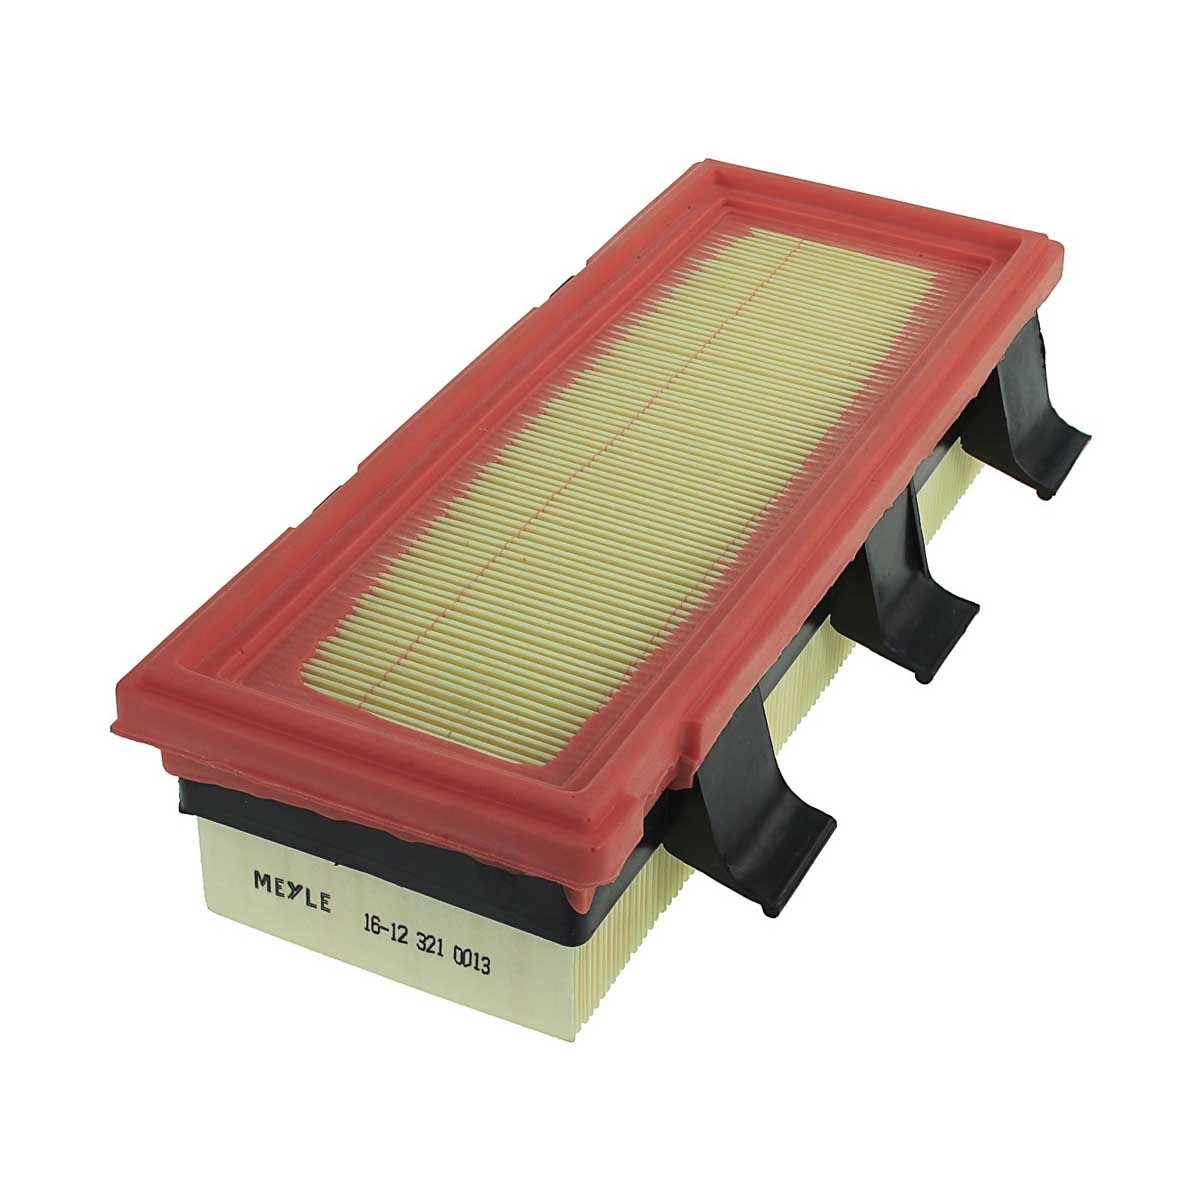 Great value for money - MEYLE Air filter 16-12 321 0013